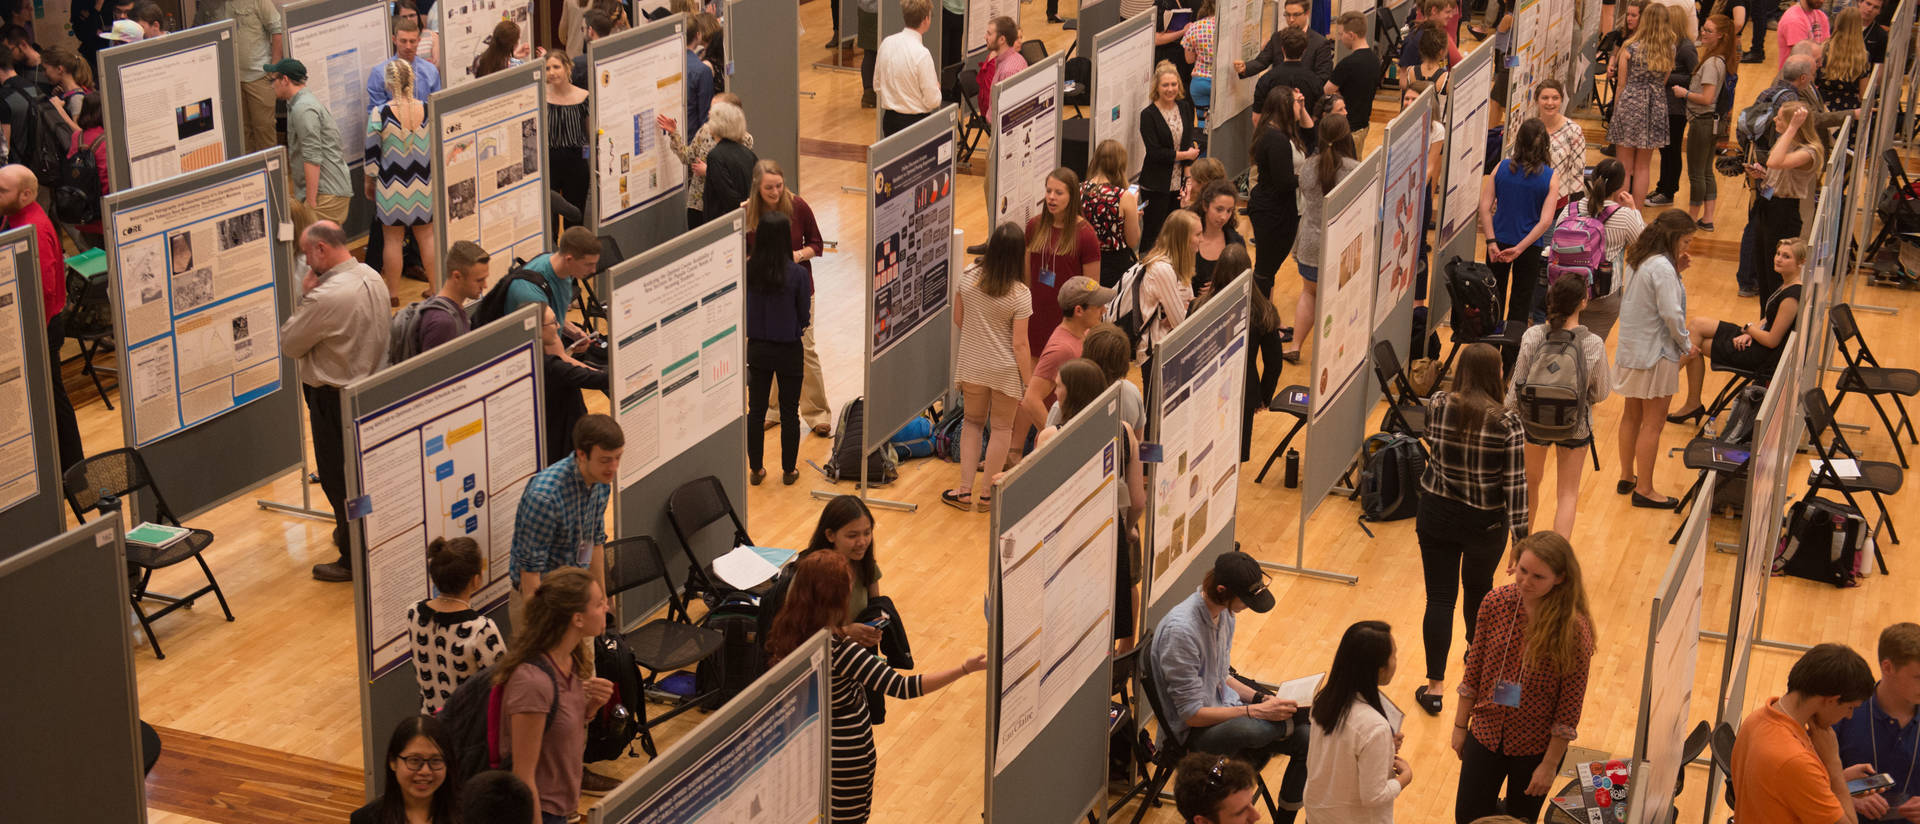 Student research poster session during UW-Eau Claire CERCA event